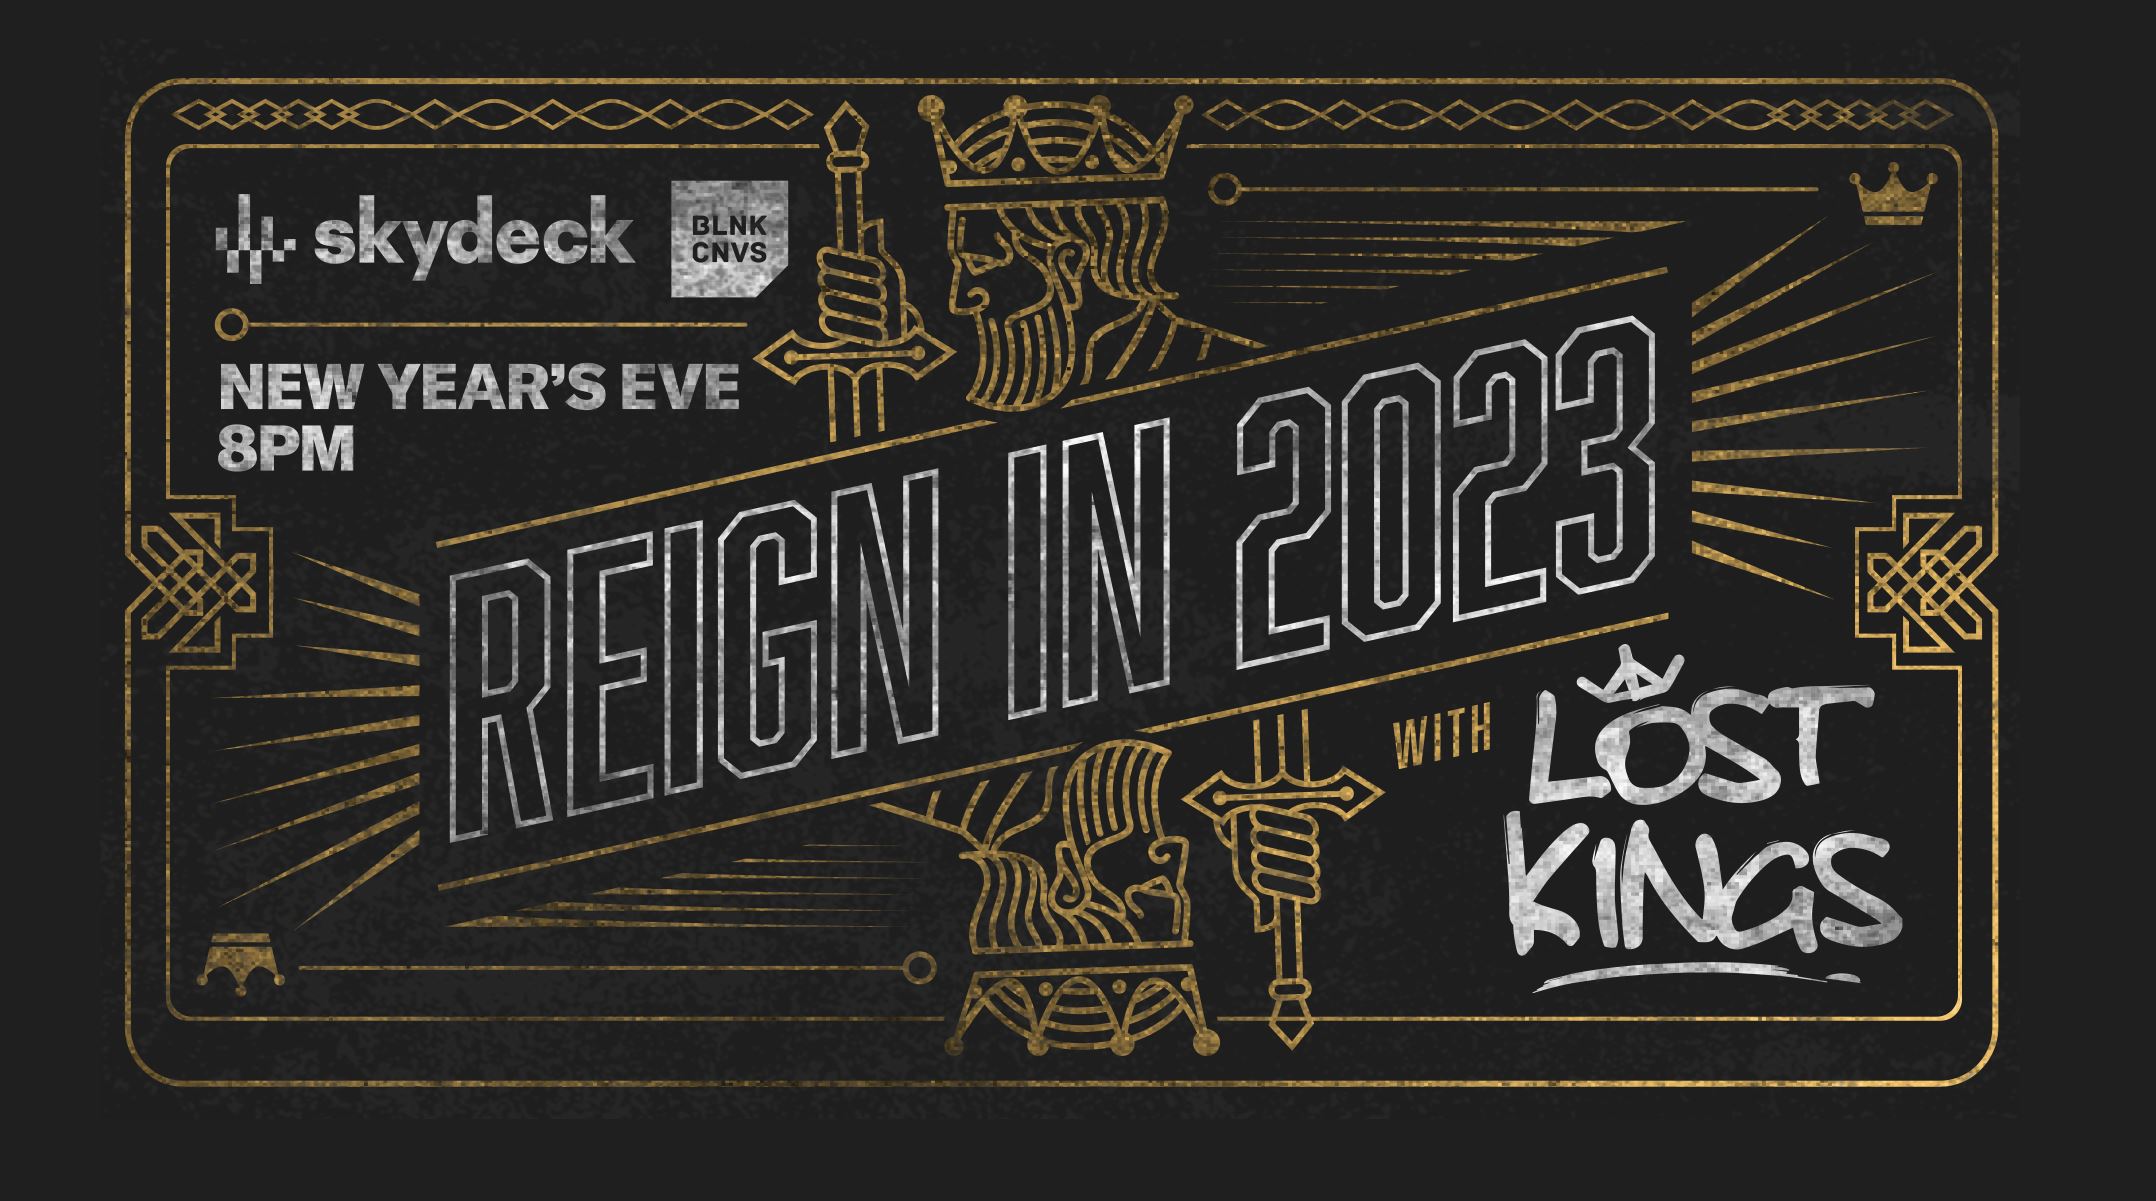 NYE on Skydeck featuring Lost Kings